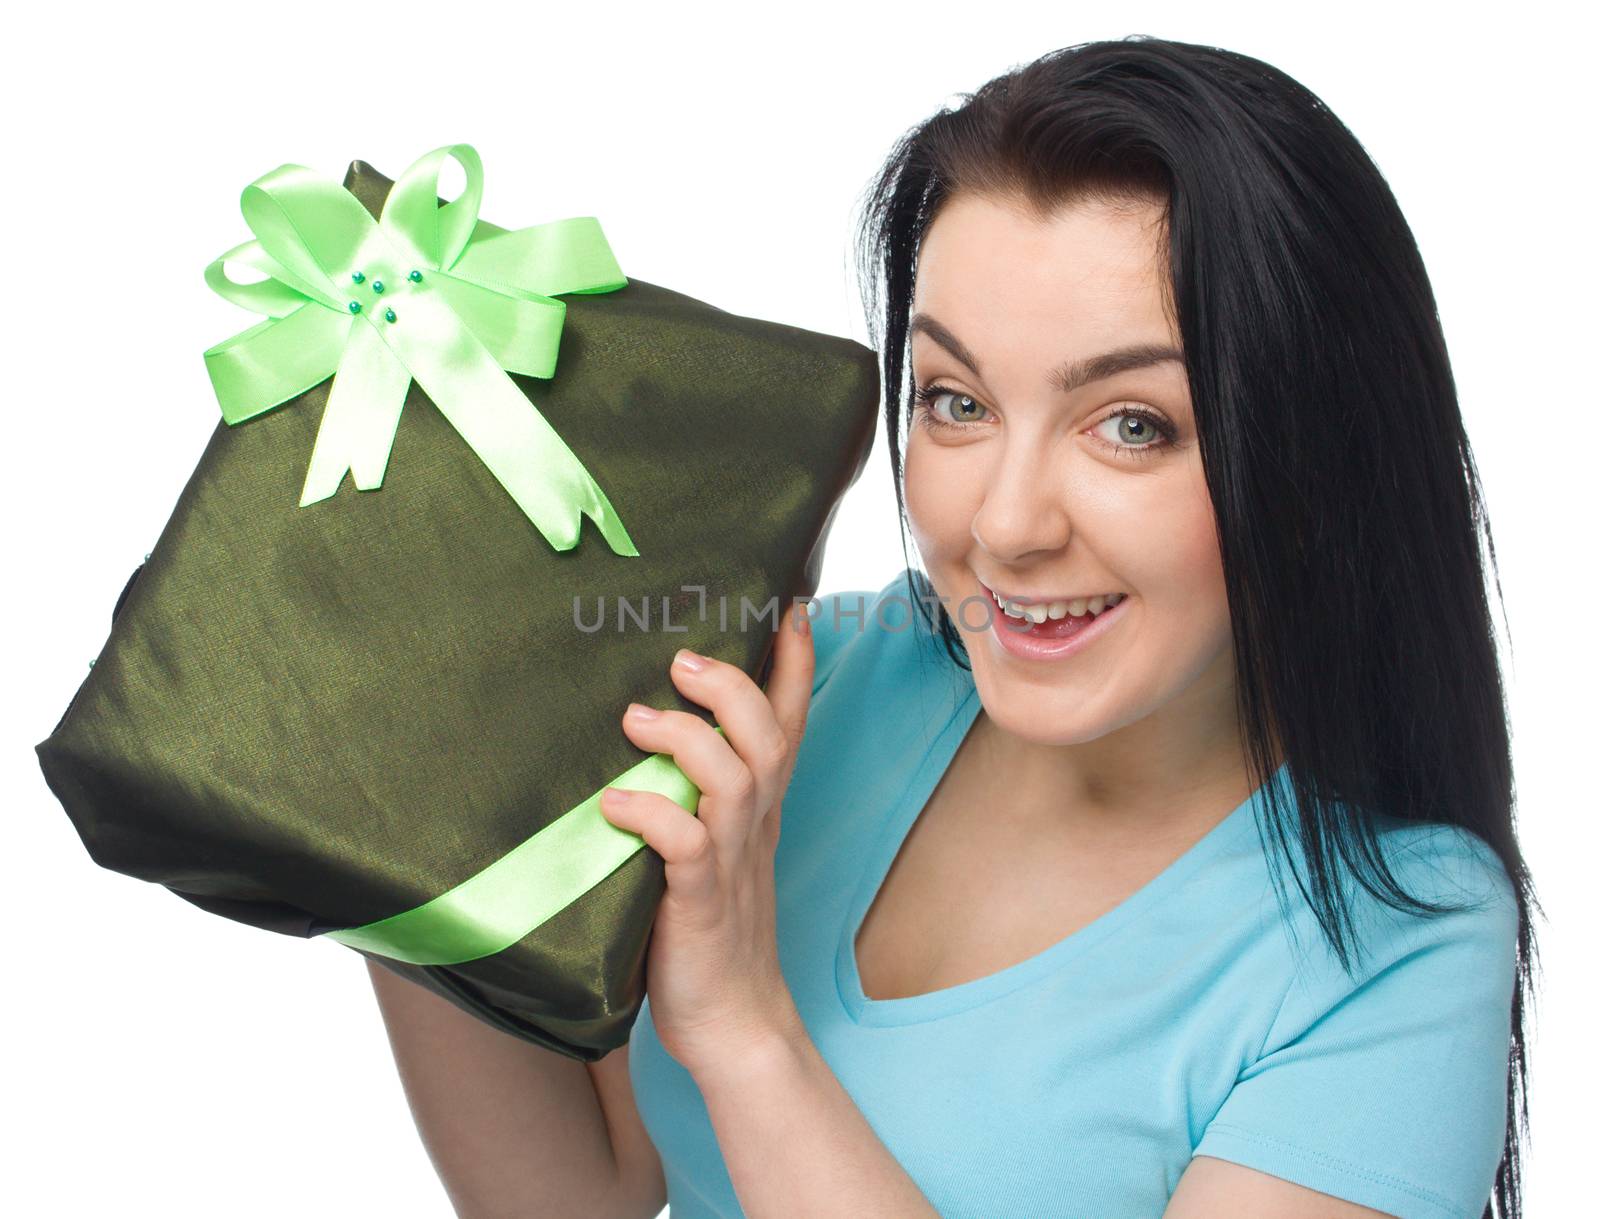 Woman holding gift box by id7100